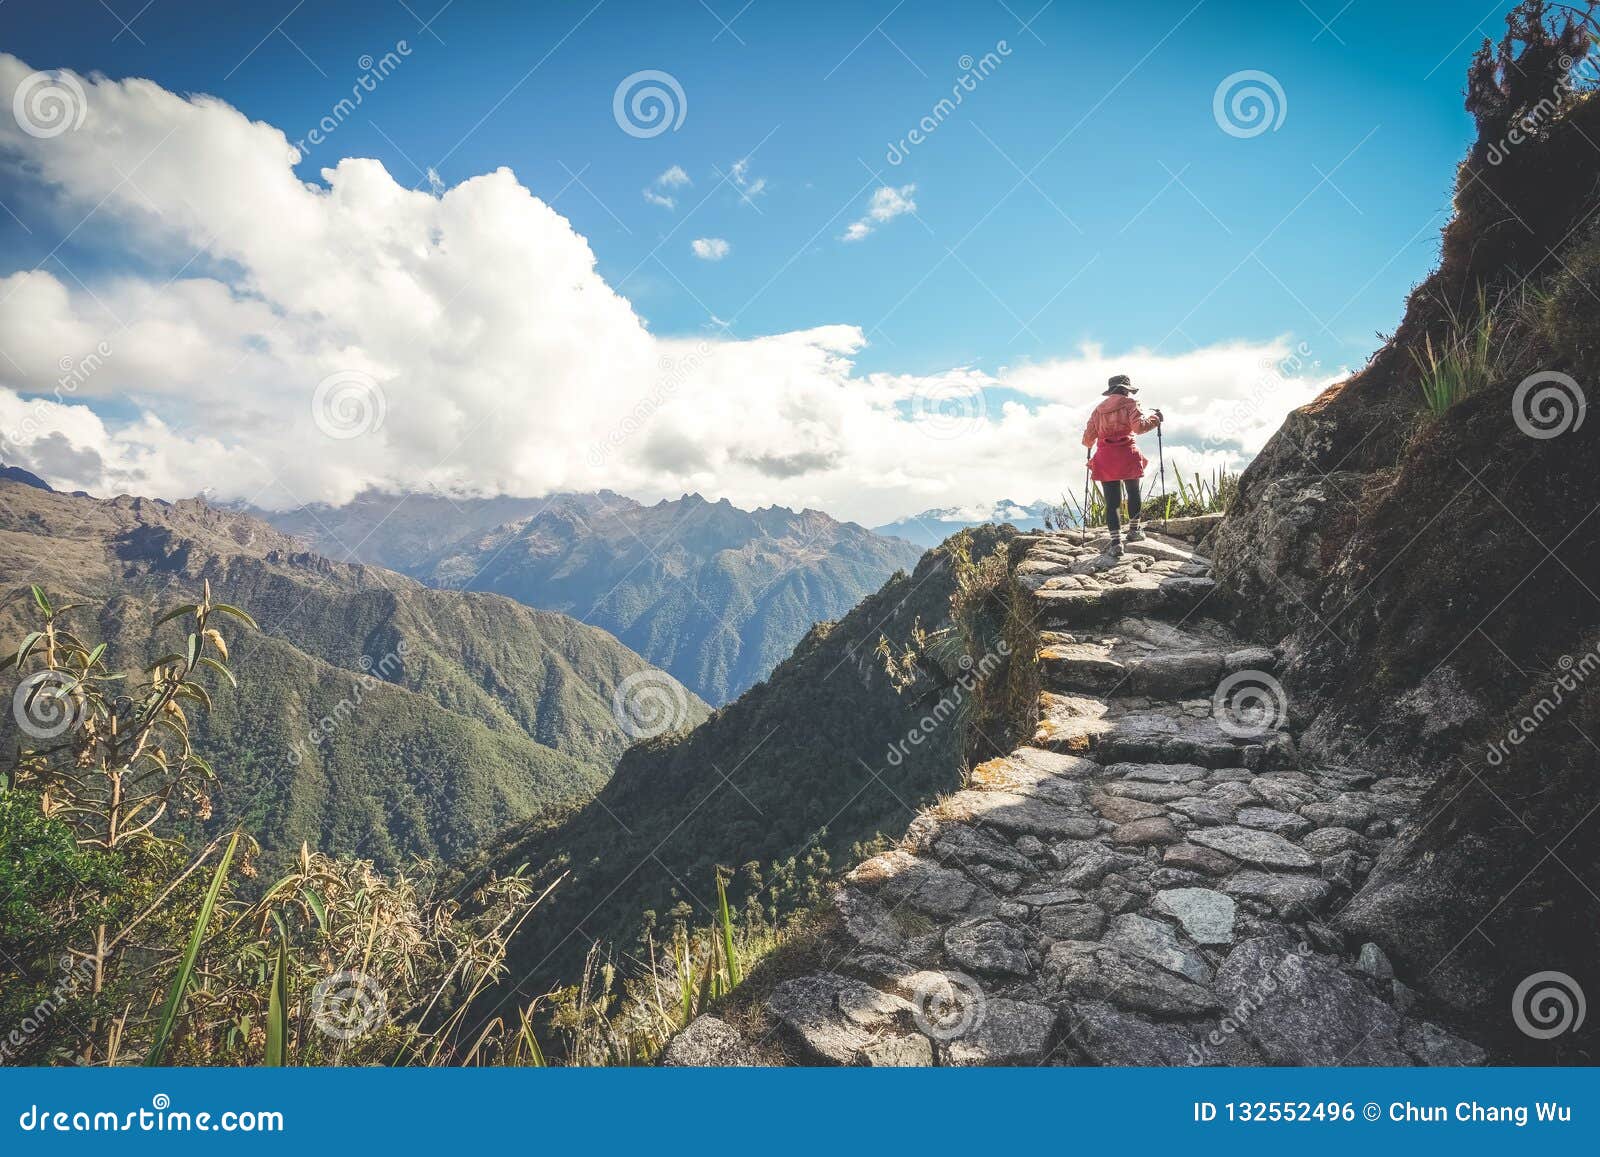 a female hiker is walking on the famous inca trail of peru with walking sticks. she is on the way to machu picchu